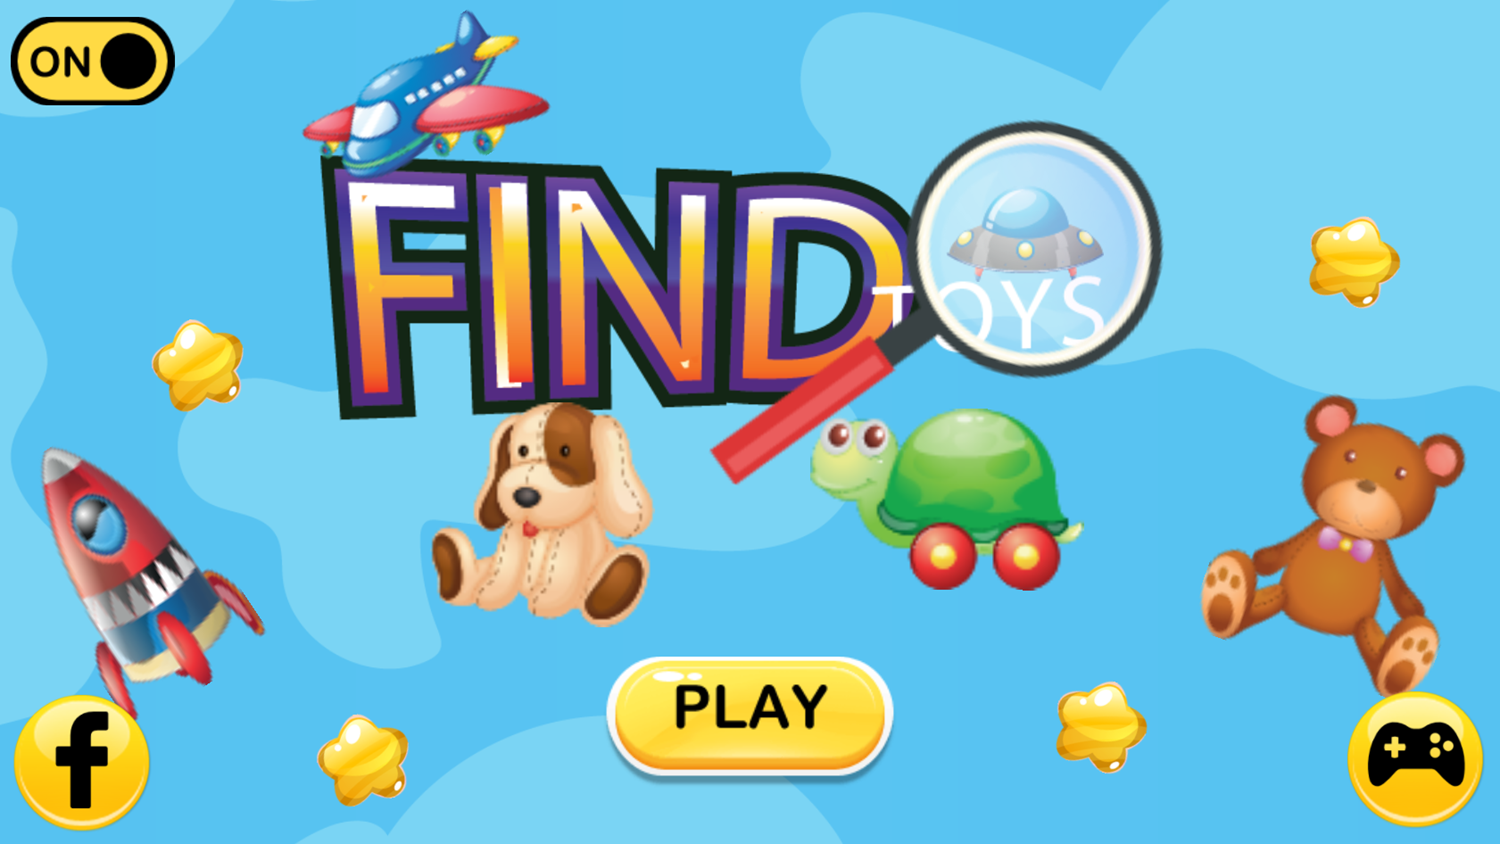 Find Toys Game Welcome Screen Screenshot.